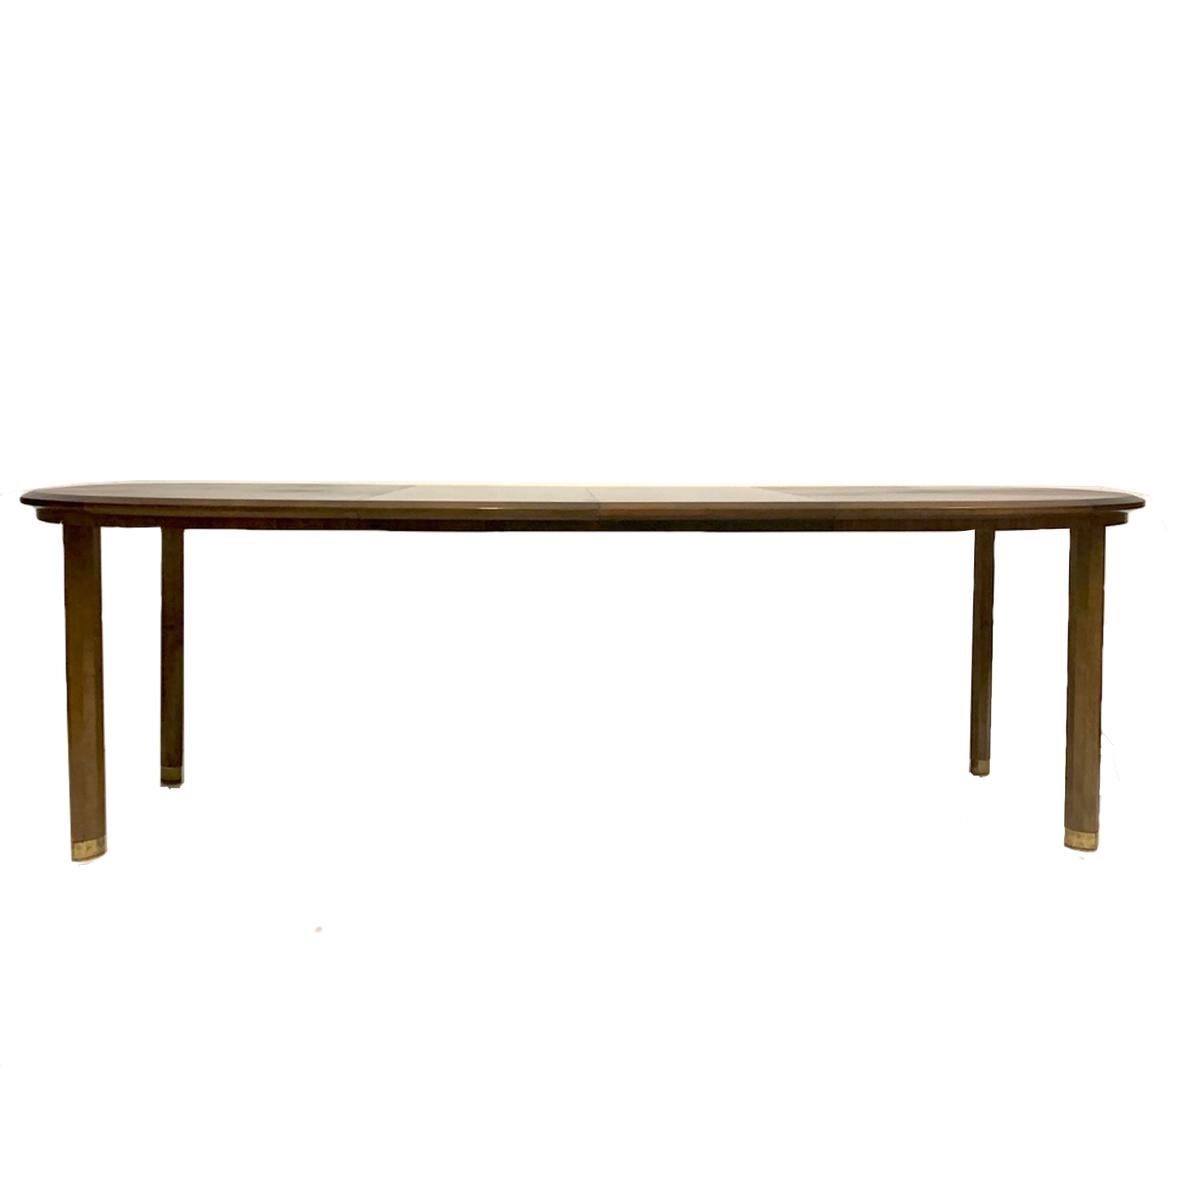 Edmond J. Spence Mixed Wood Oval Extension Dining Table w Burled Elm & Walnut y 4